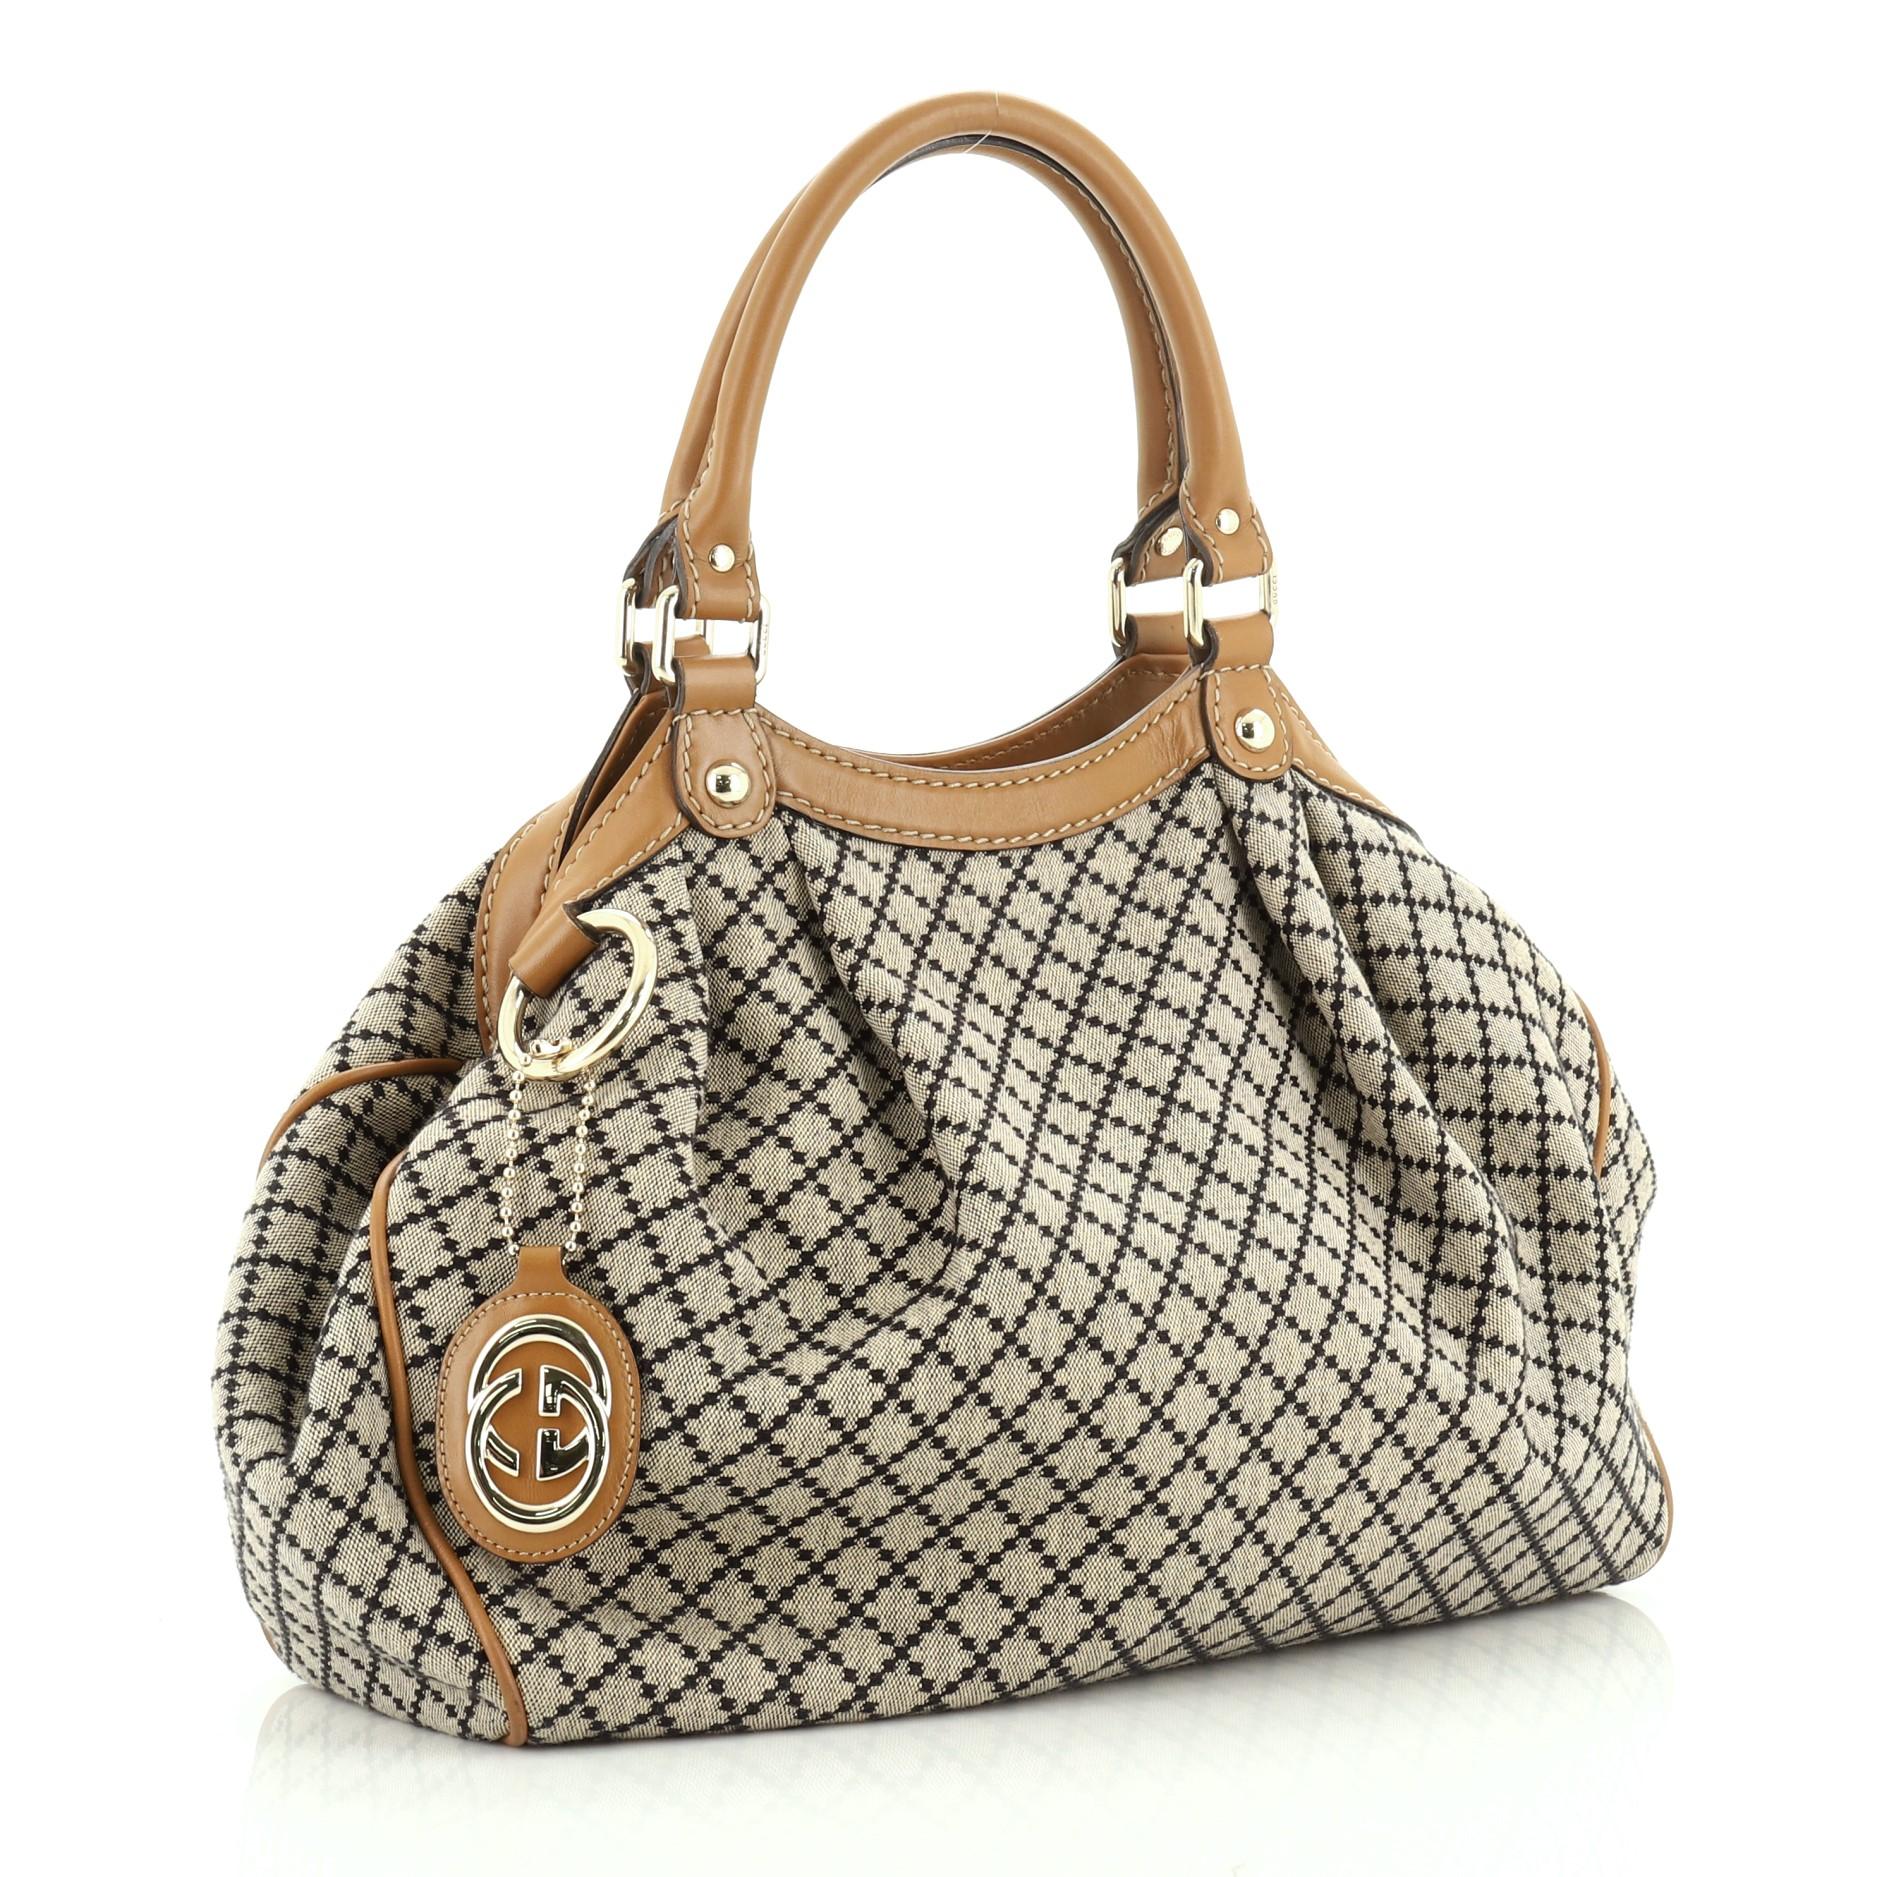 This Gucci Sukey Tote Diamante Canvas Medium, crafted from brown diamante canvas, features dual rolled leather handles and gold-tone hardware. Its magnetic snap closure opens to a neutral fabric interior with zip pocket. 

Estimated Retail Price: